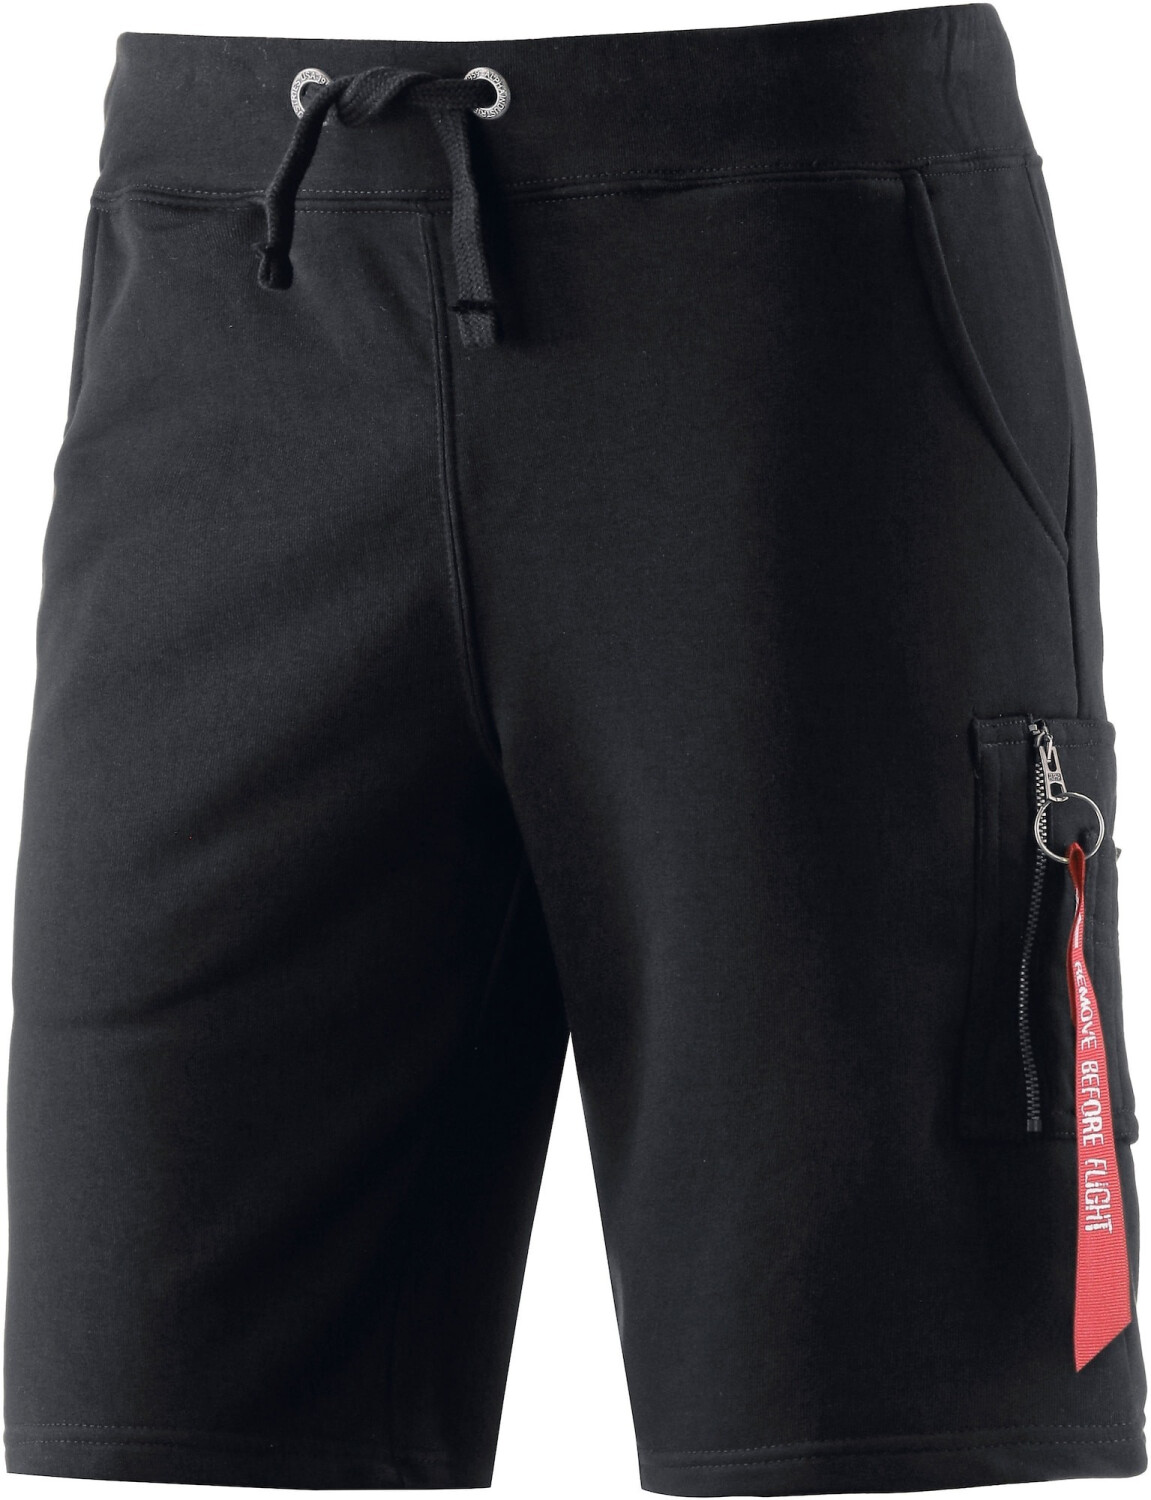 Shorts Men\'s Alpha Best Deals – £23.65 from Industries (Today) Buy (166301) on X-Fit